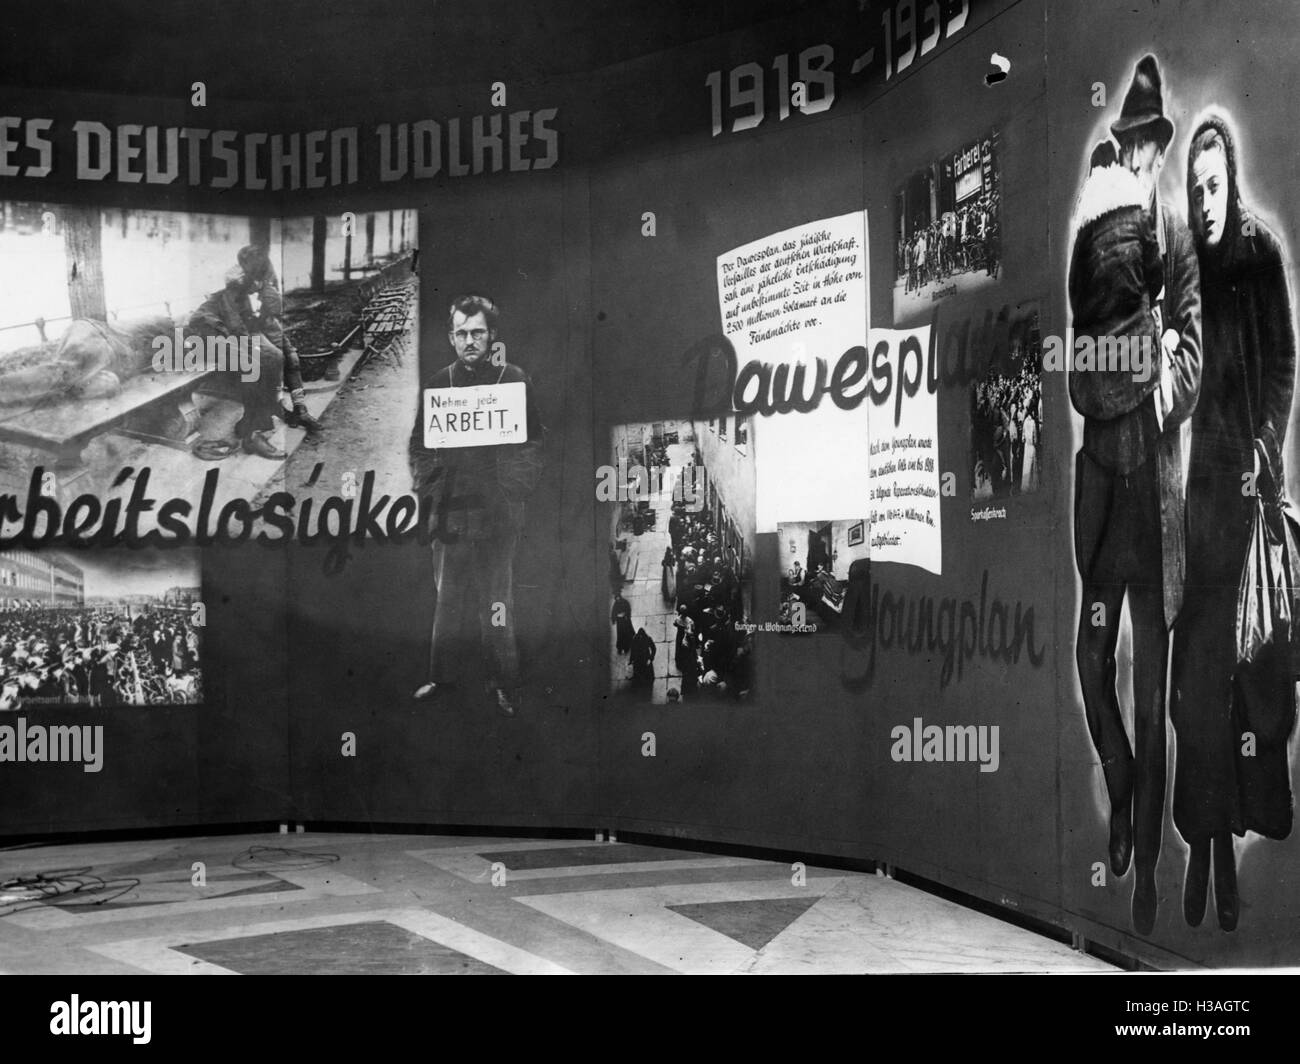 'View of the exhibition ''The Eternal Jew'', 1938' Stock Photo